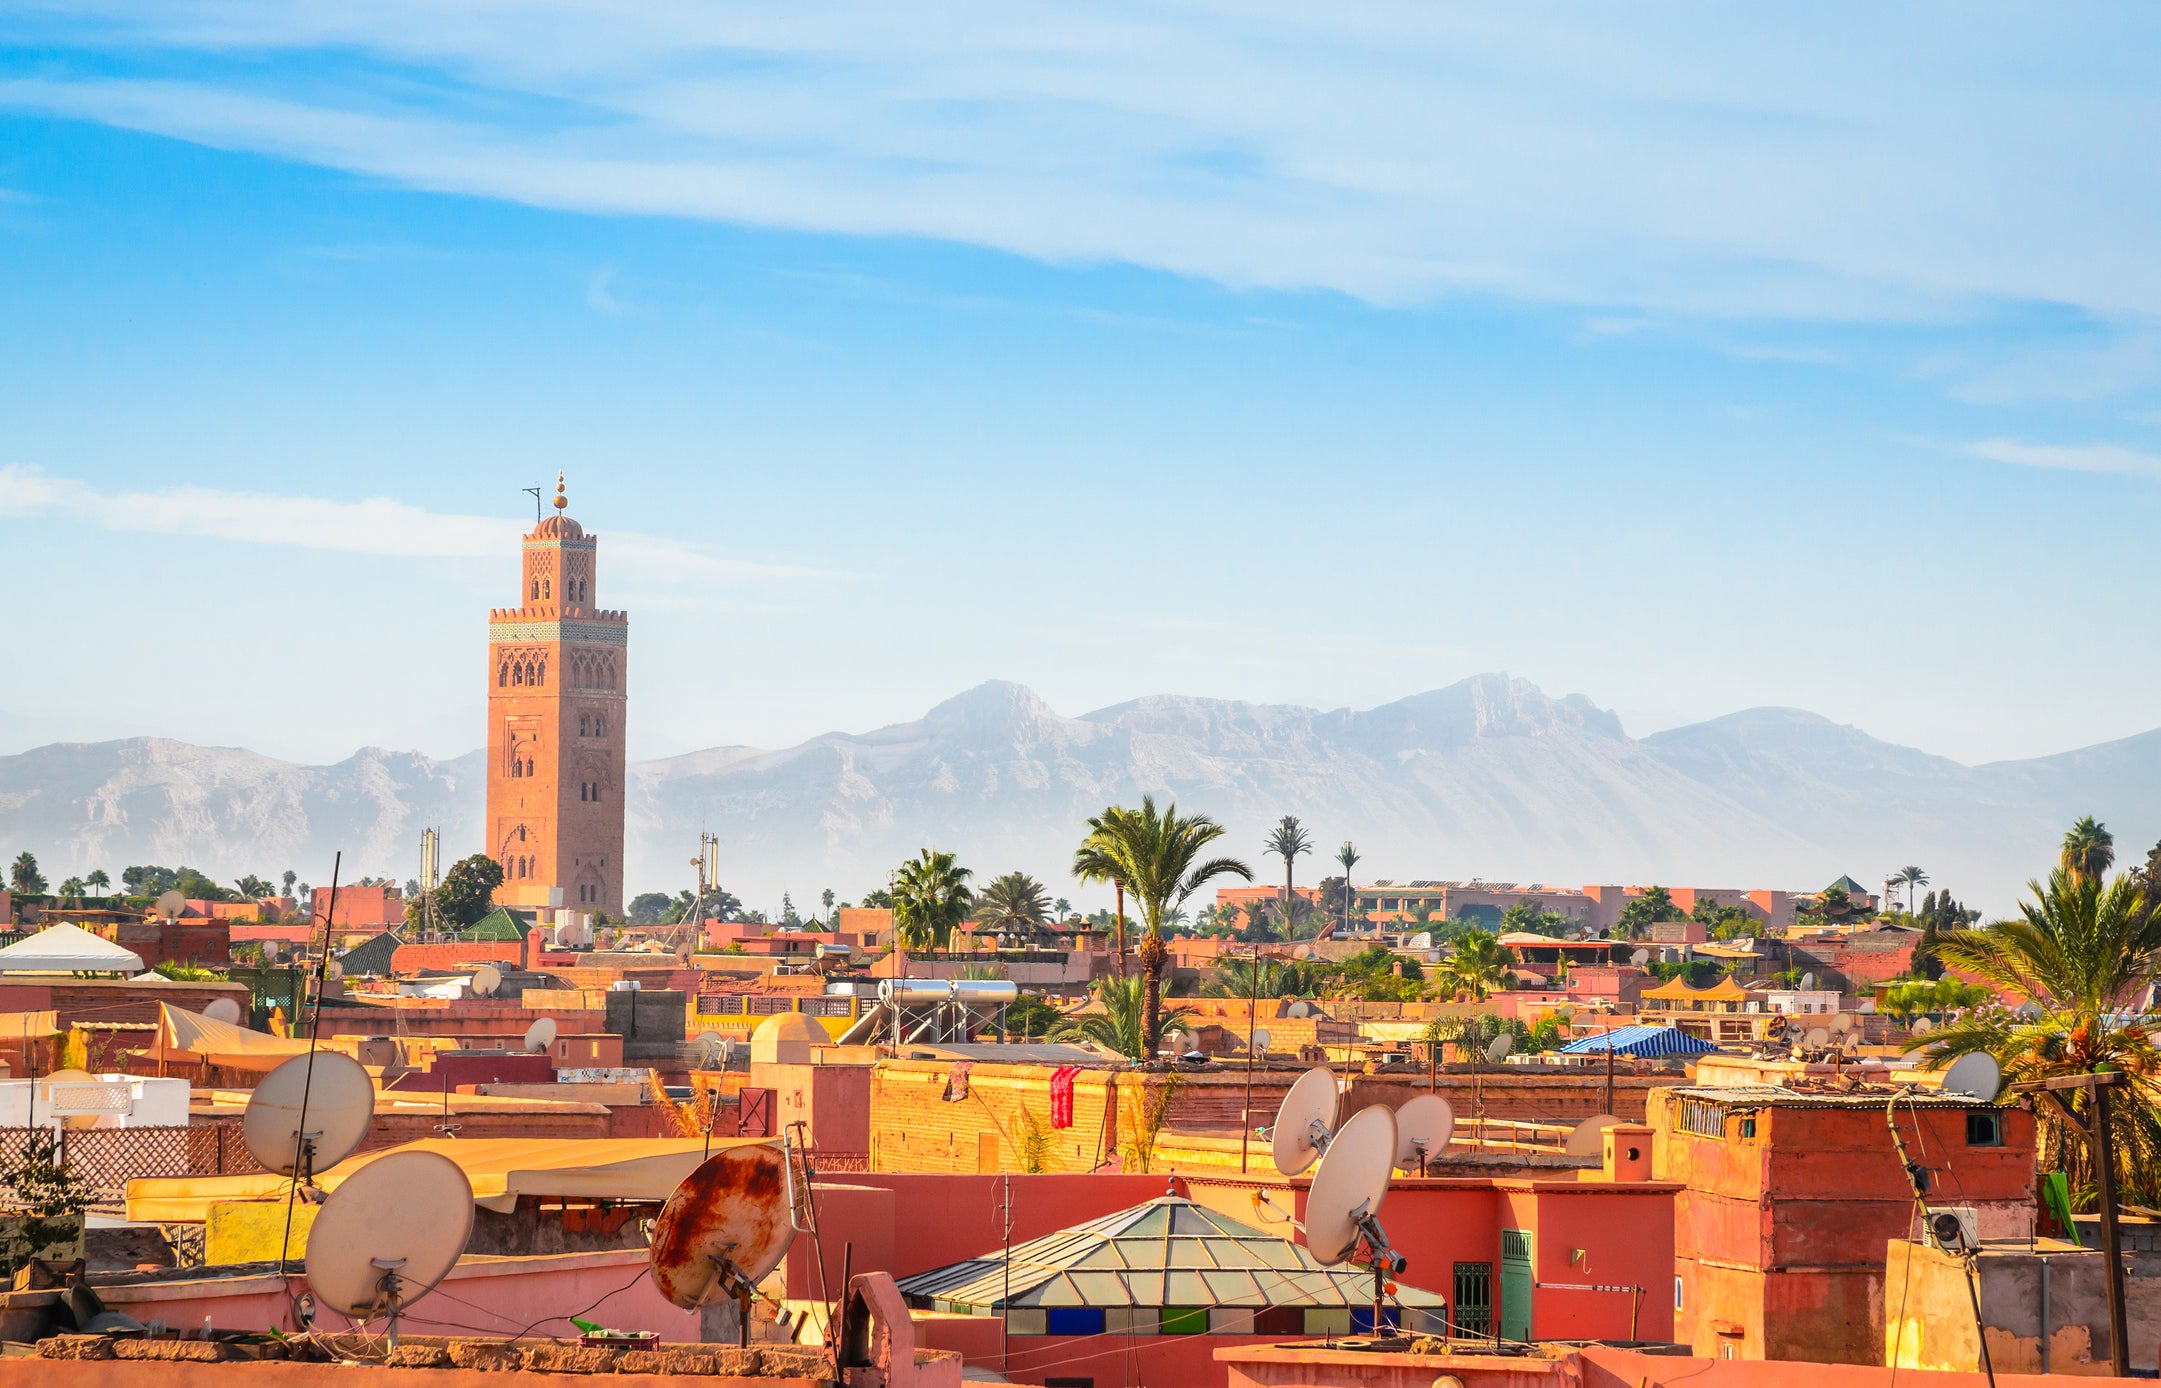 Marrakech is rich in colour, culture and cuisine